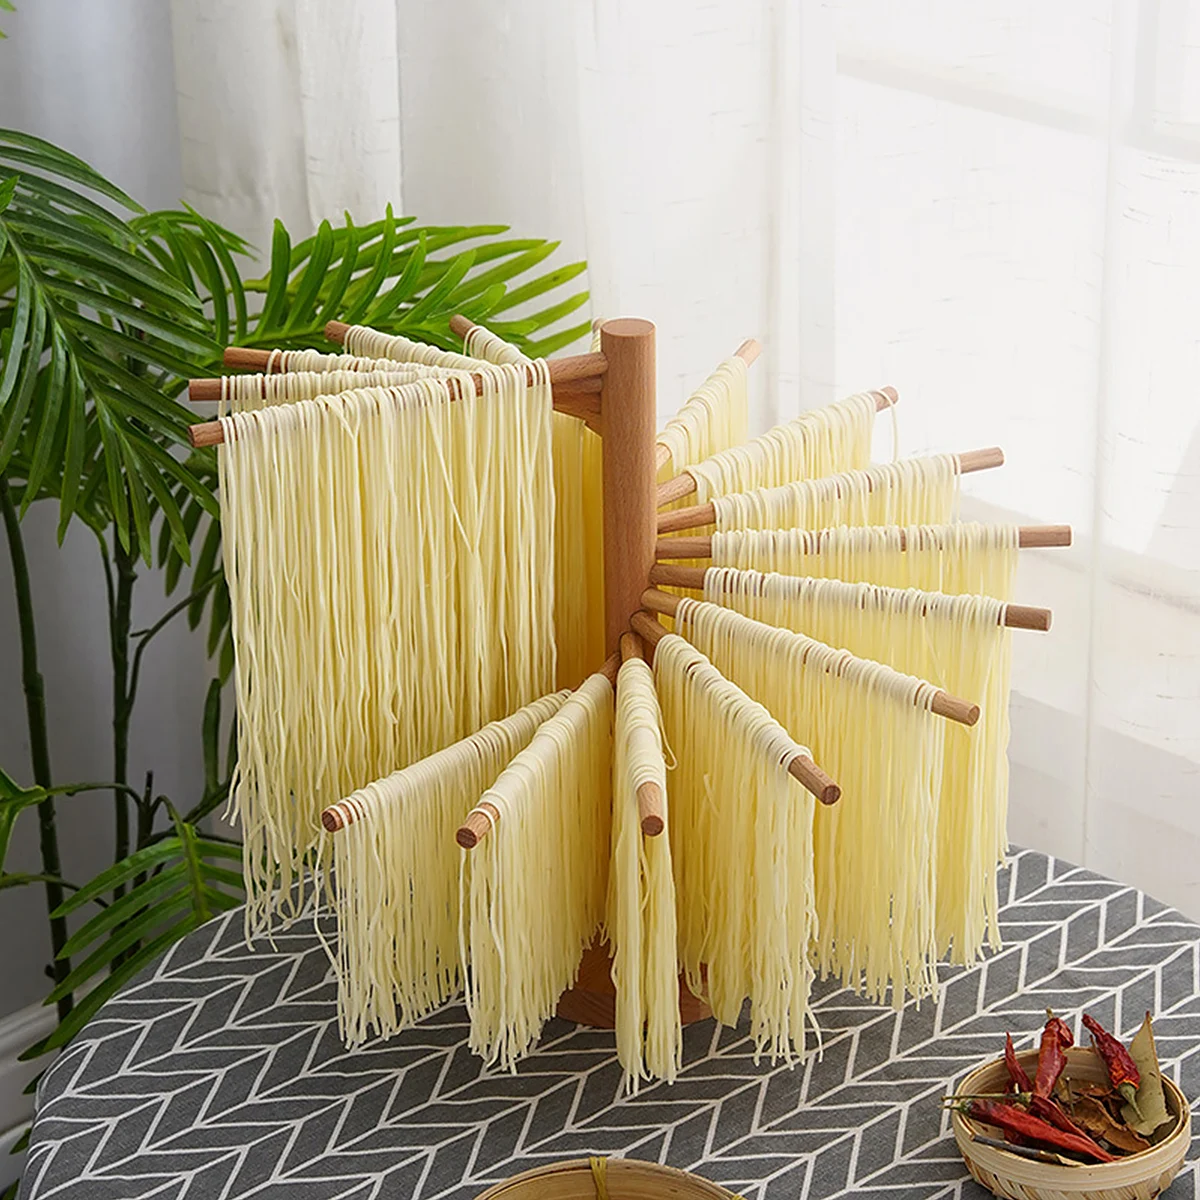 

Pasta Drying Rack Spaghetti Dryer Stand Noodles Drying Holder Hanging Rack Pasta Cooking Tools Kitchen Accessories Gadgets